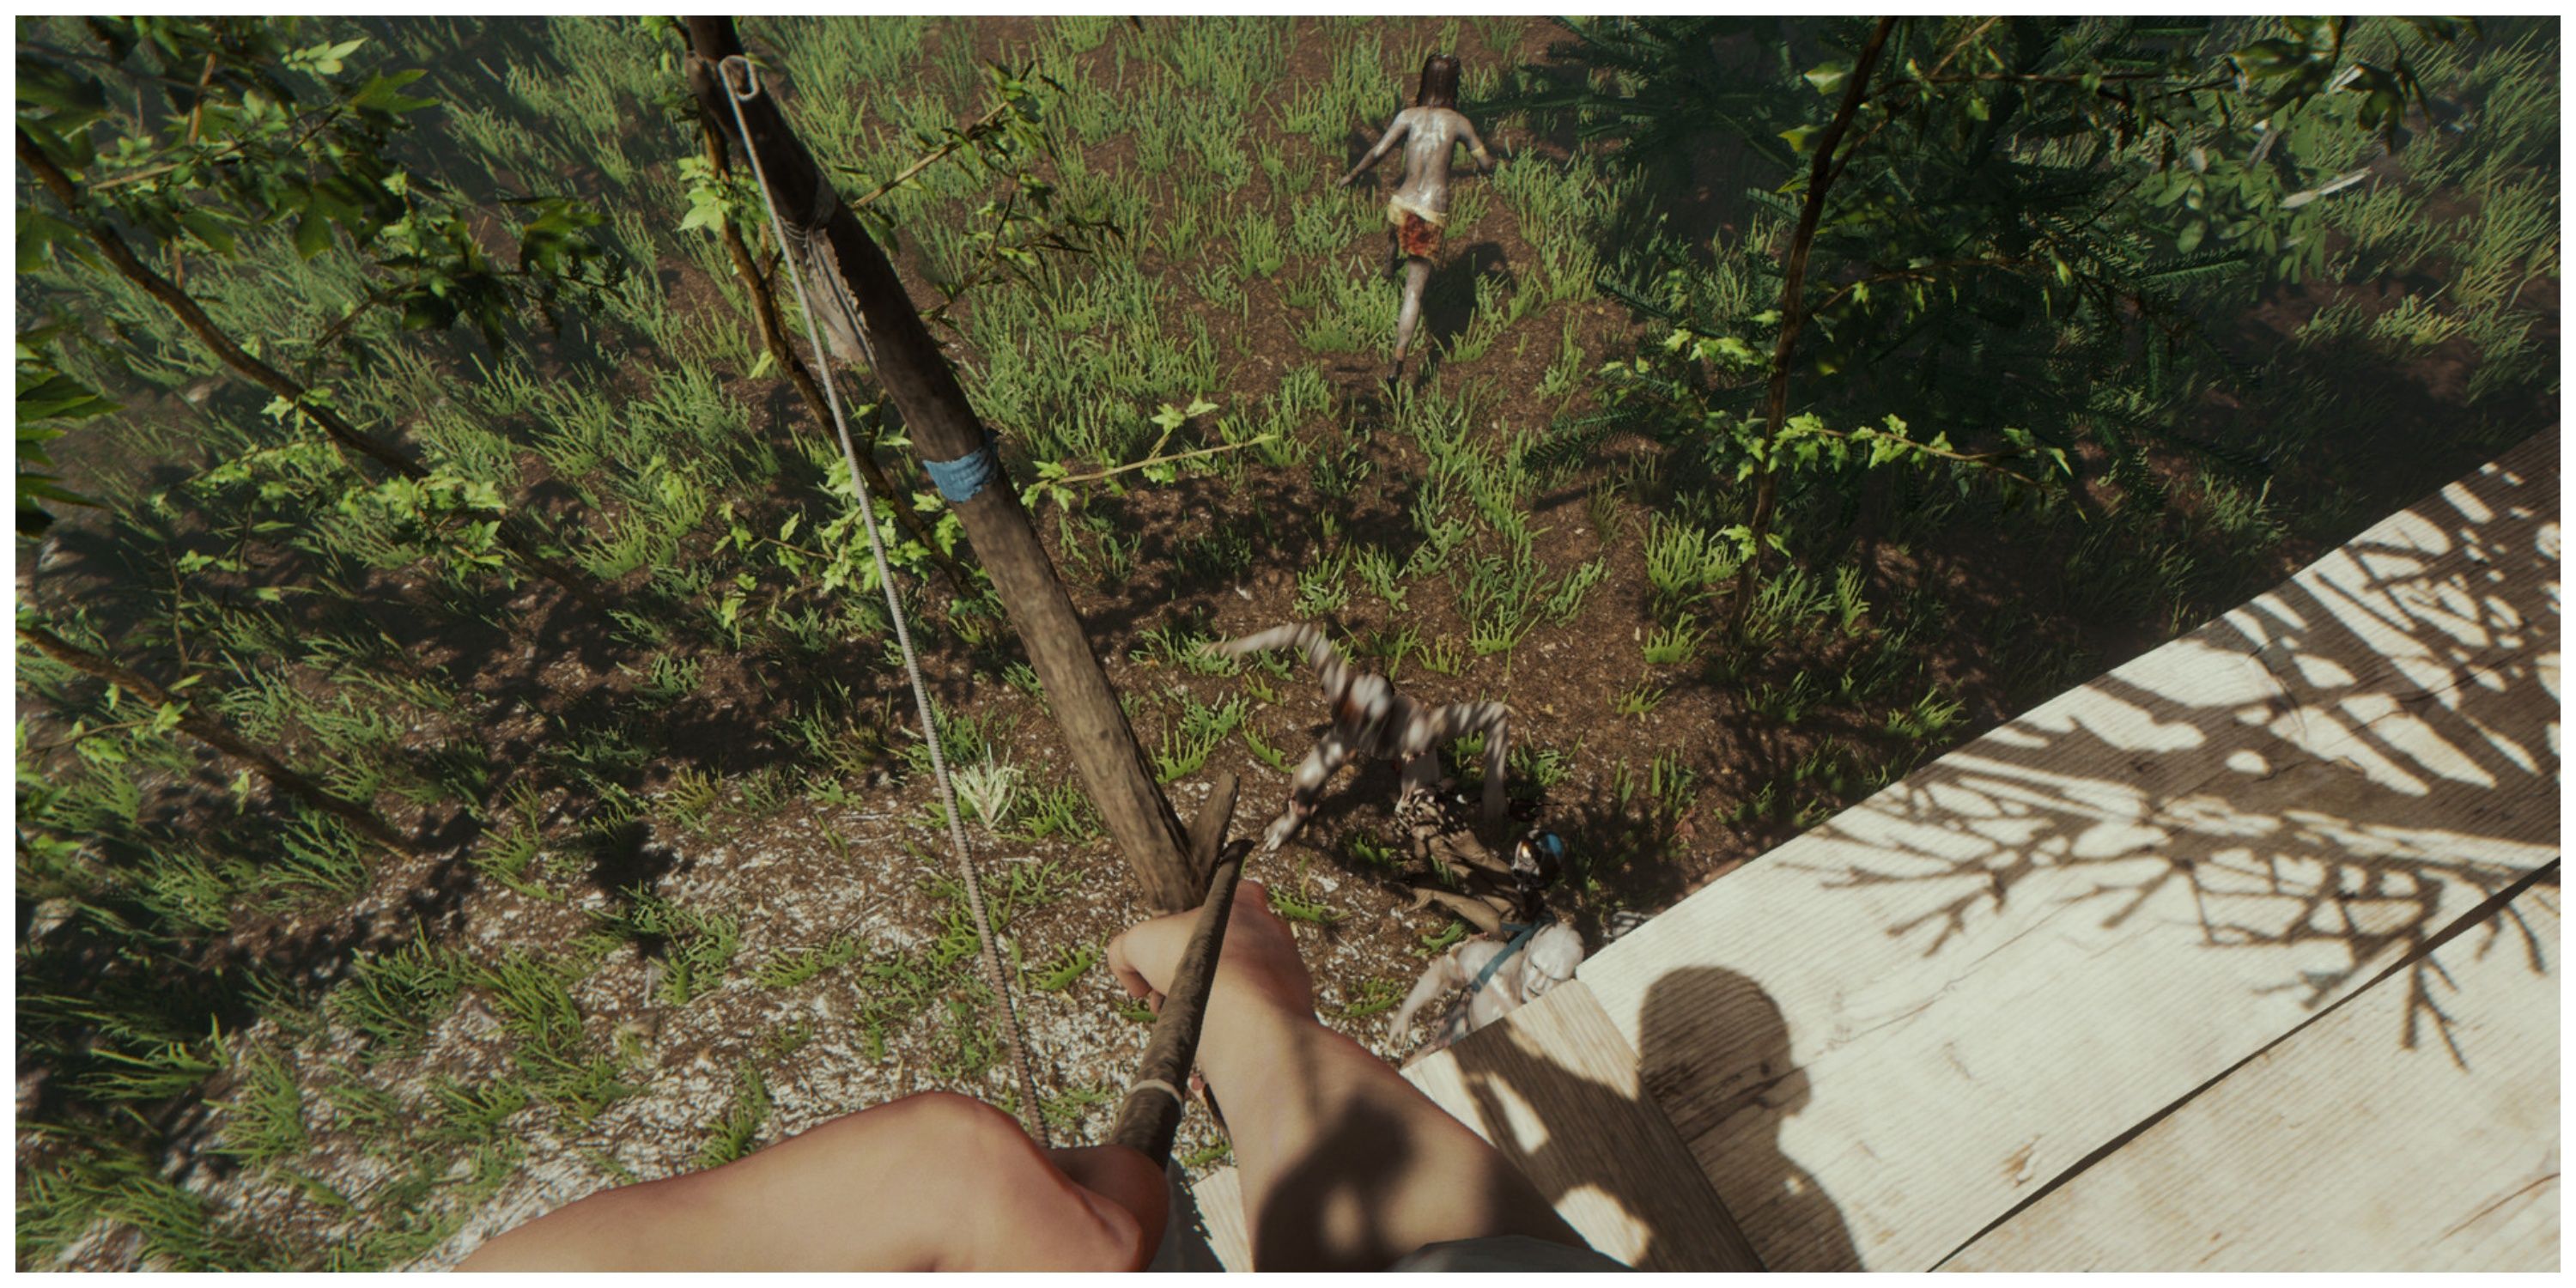 The Forest - Firing At Enemies With A Bow And Arrow